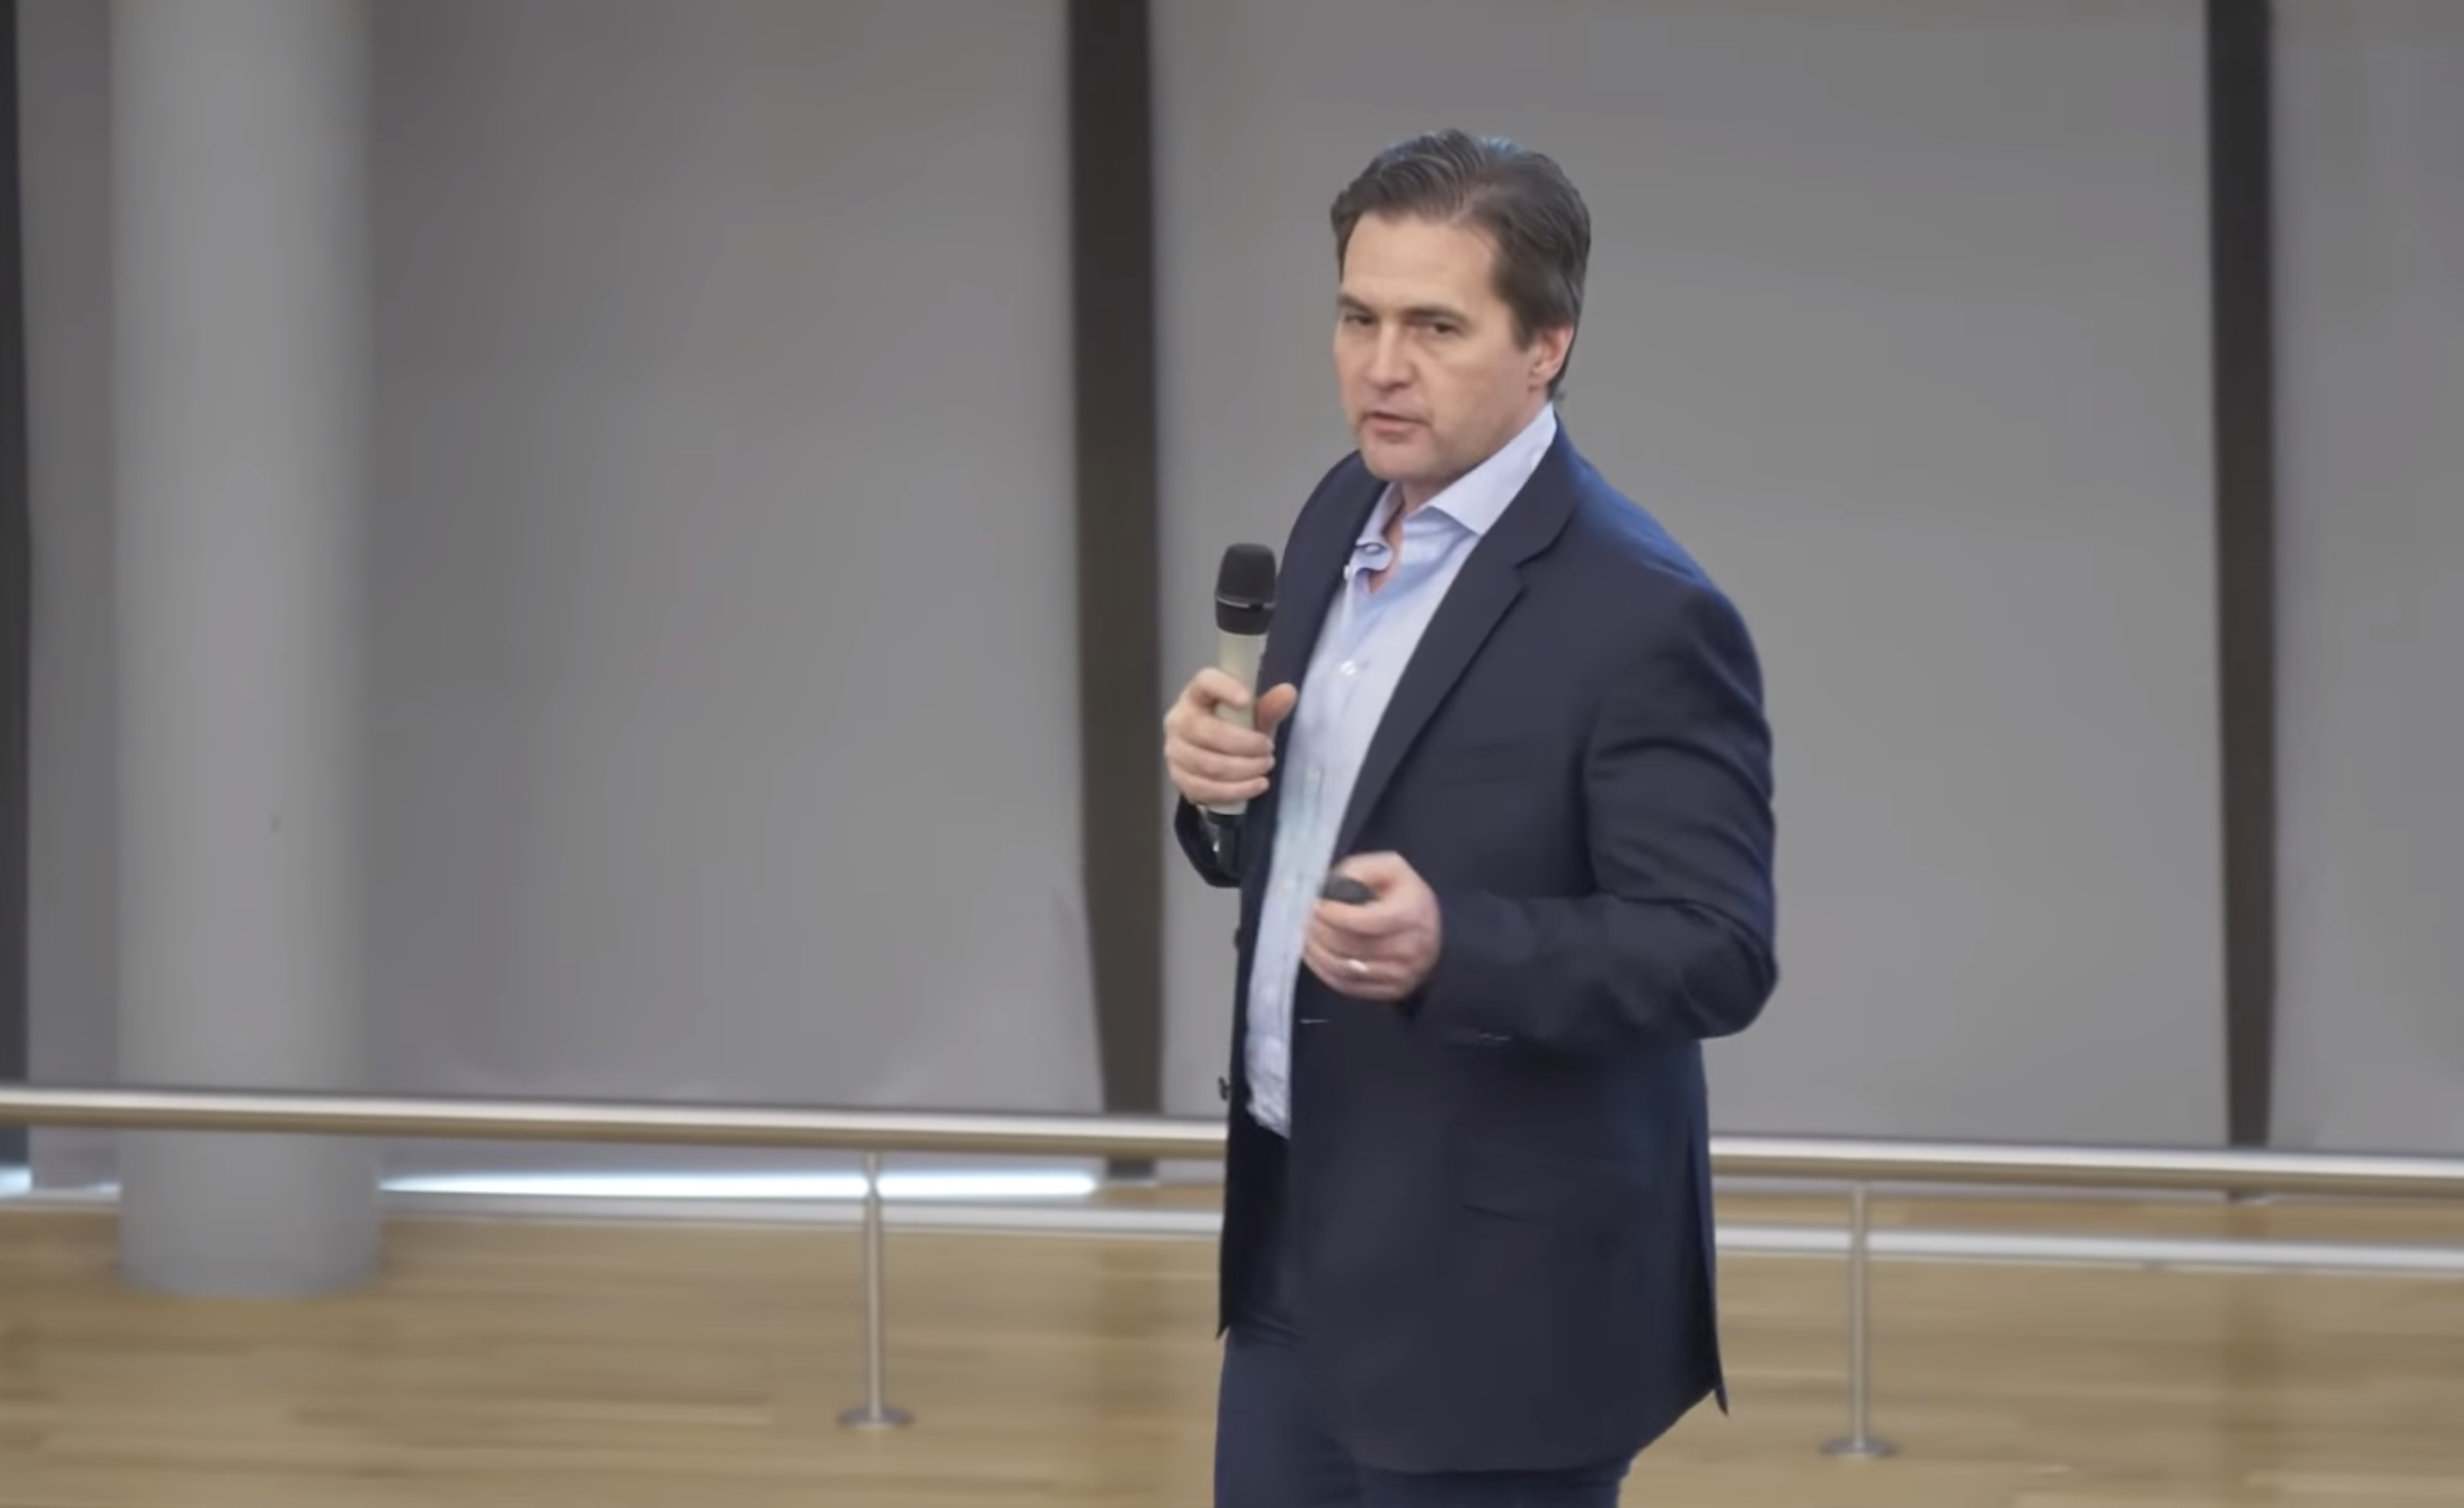 Craig-wright-must-face-trial-over-alleged-$11b-bitcoin-fortune-as-request-for-summary-judgment-denied